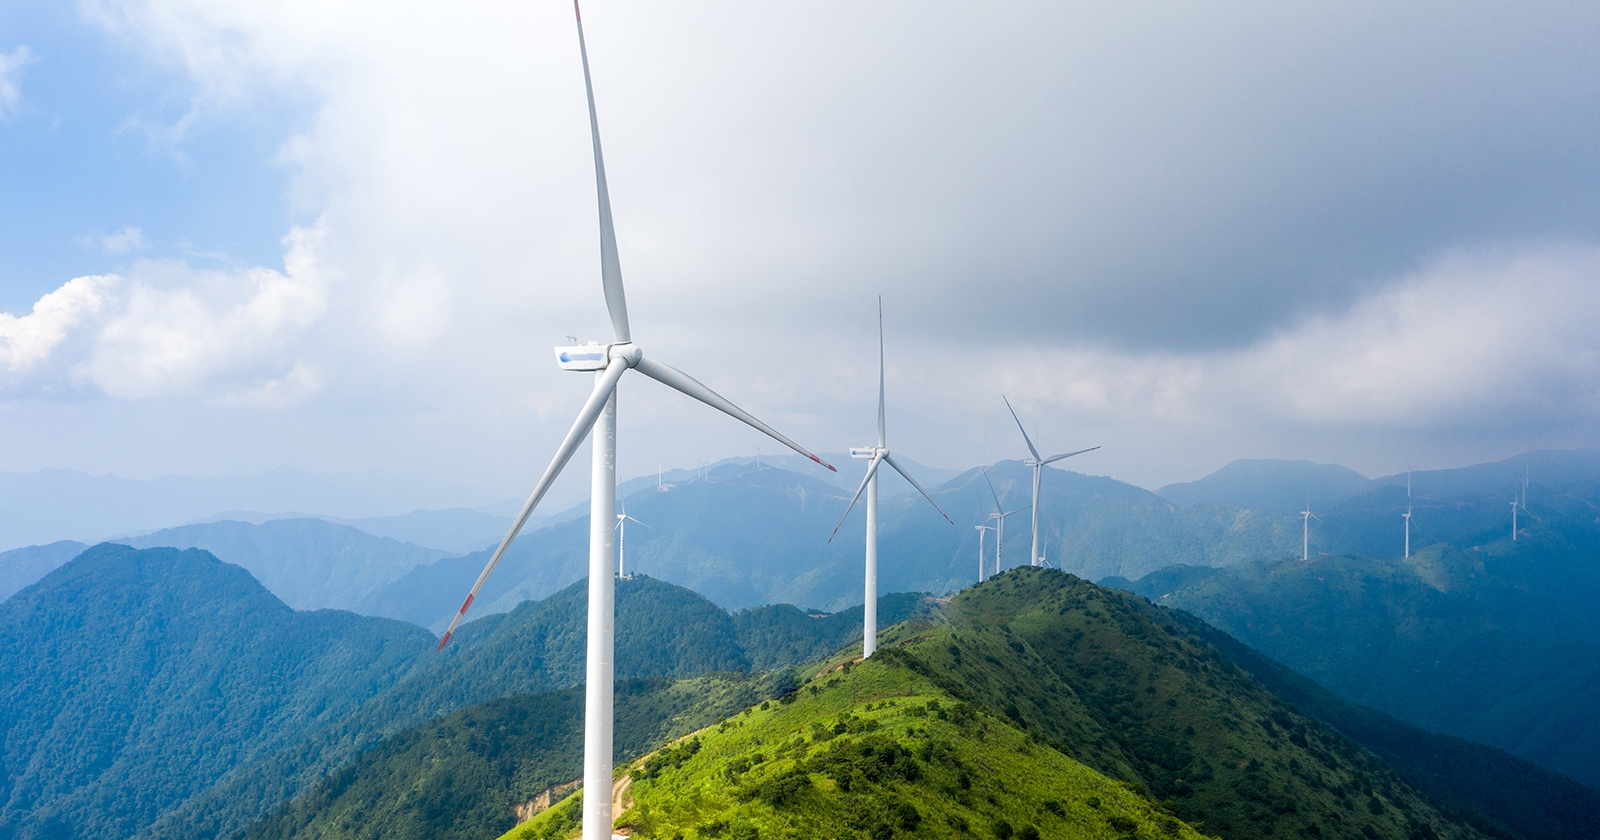 Wind turbines on a mountain range. Exponent's Environment & Sustainability expertise helps you make informed decisions.